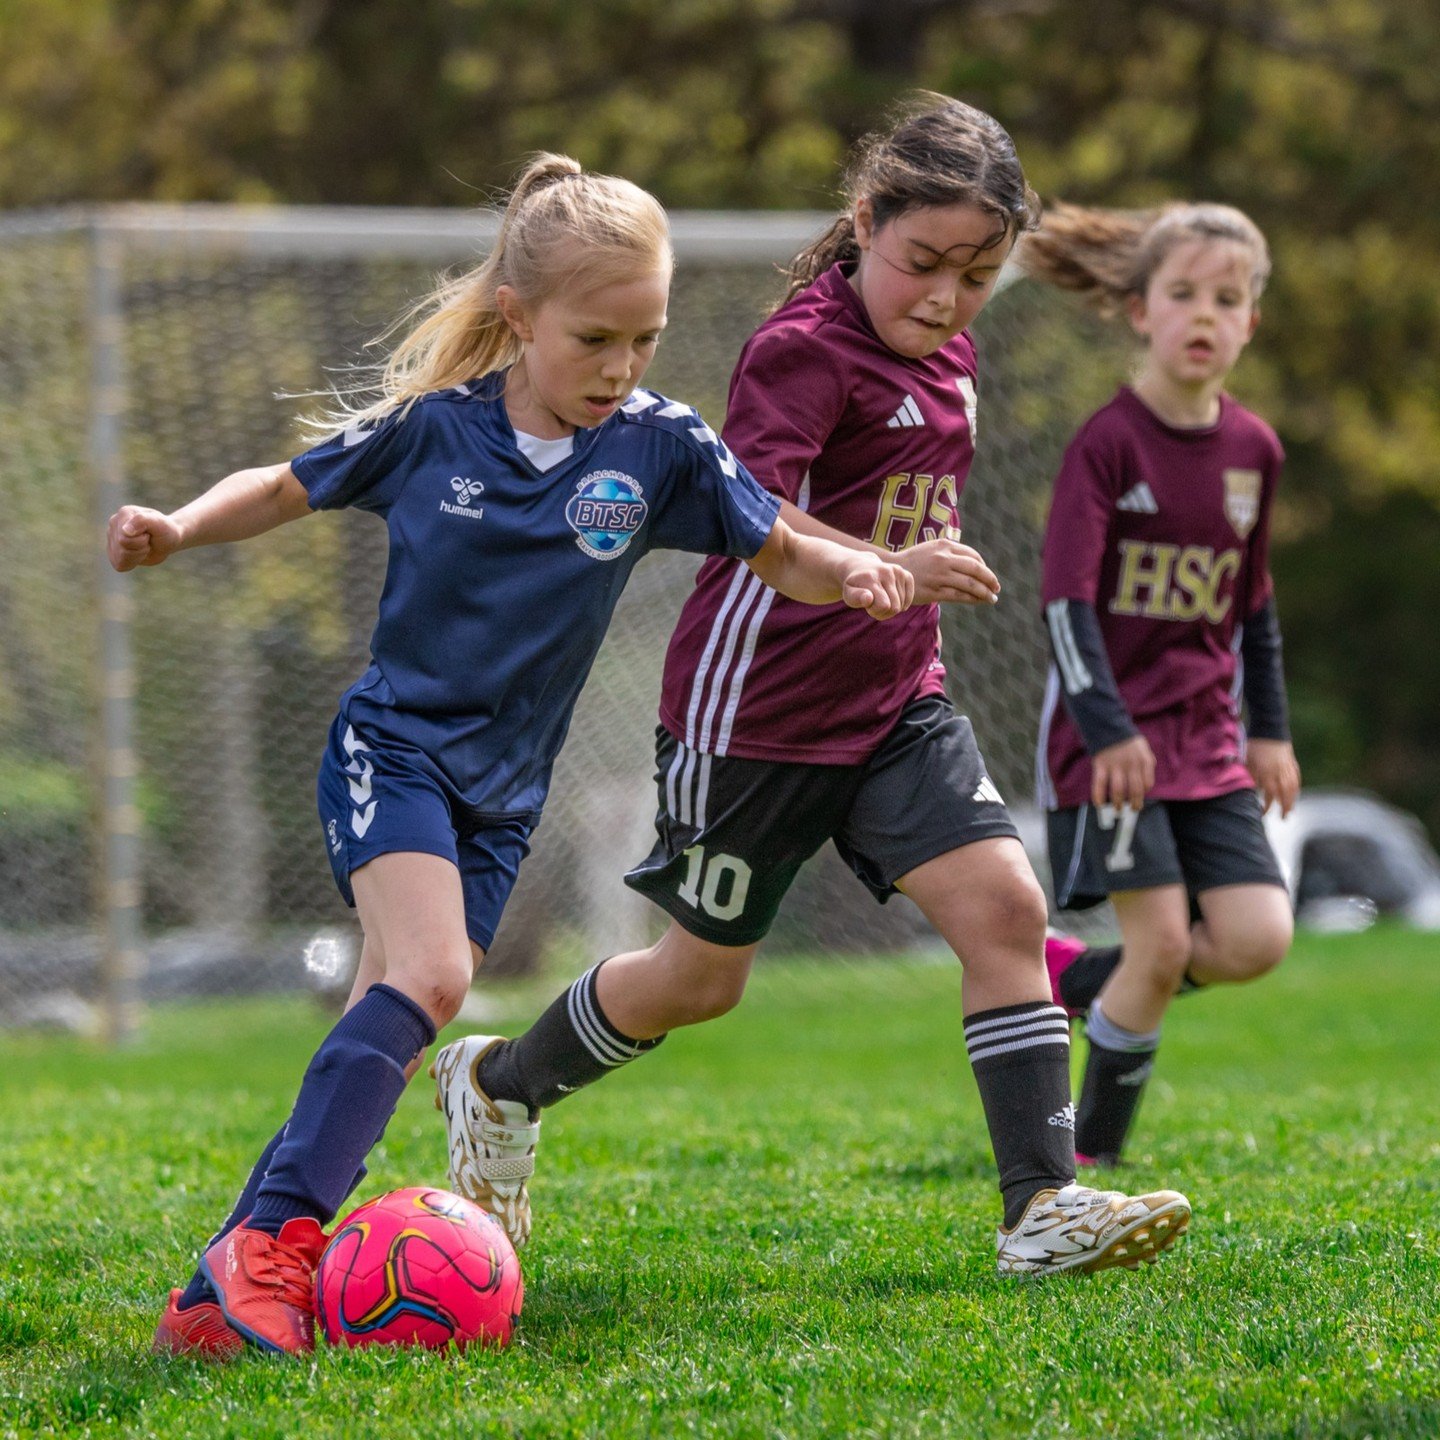 Taking possession

#youthsoccer #travelsoccer #soccerphotography #soccerphotographynj #njsportsphotography